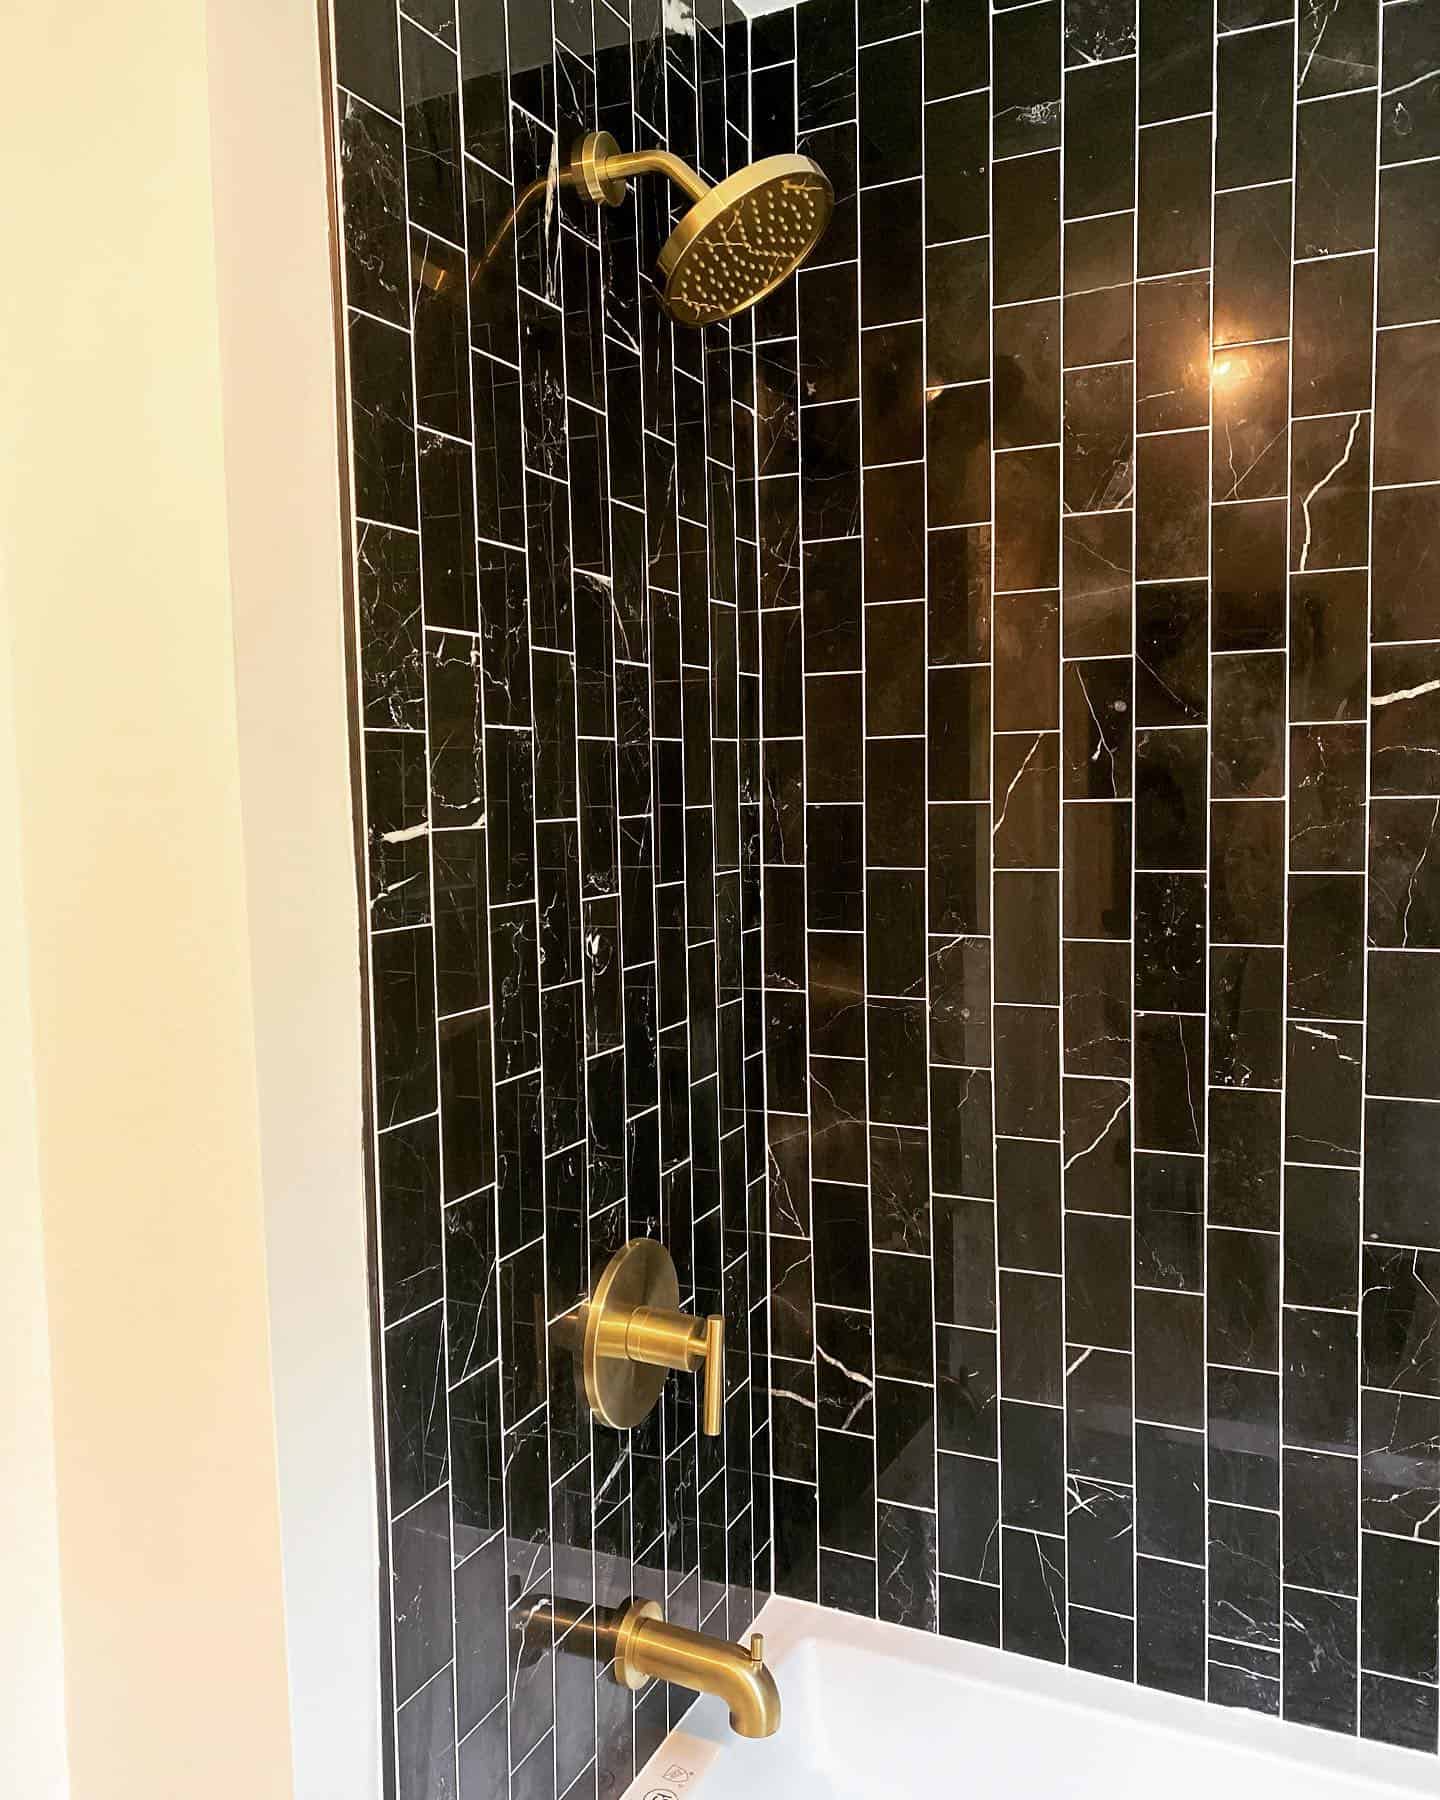 Gold shower and faucet with black ceramic tiles